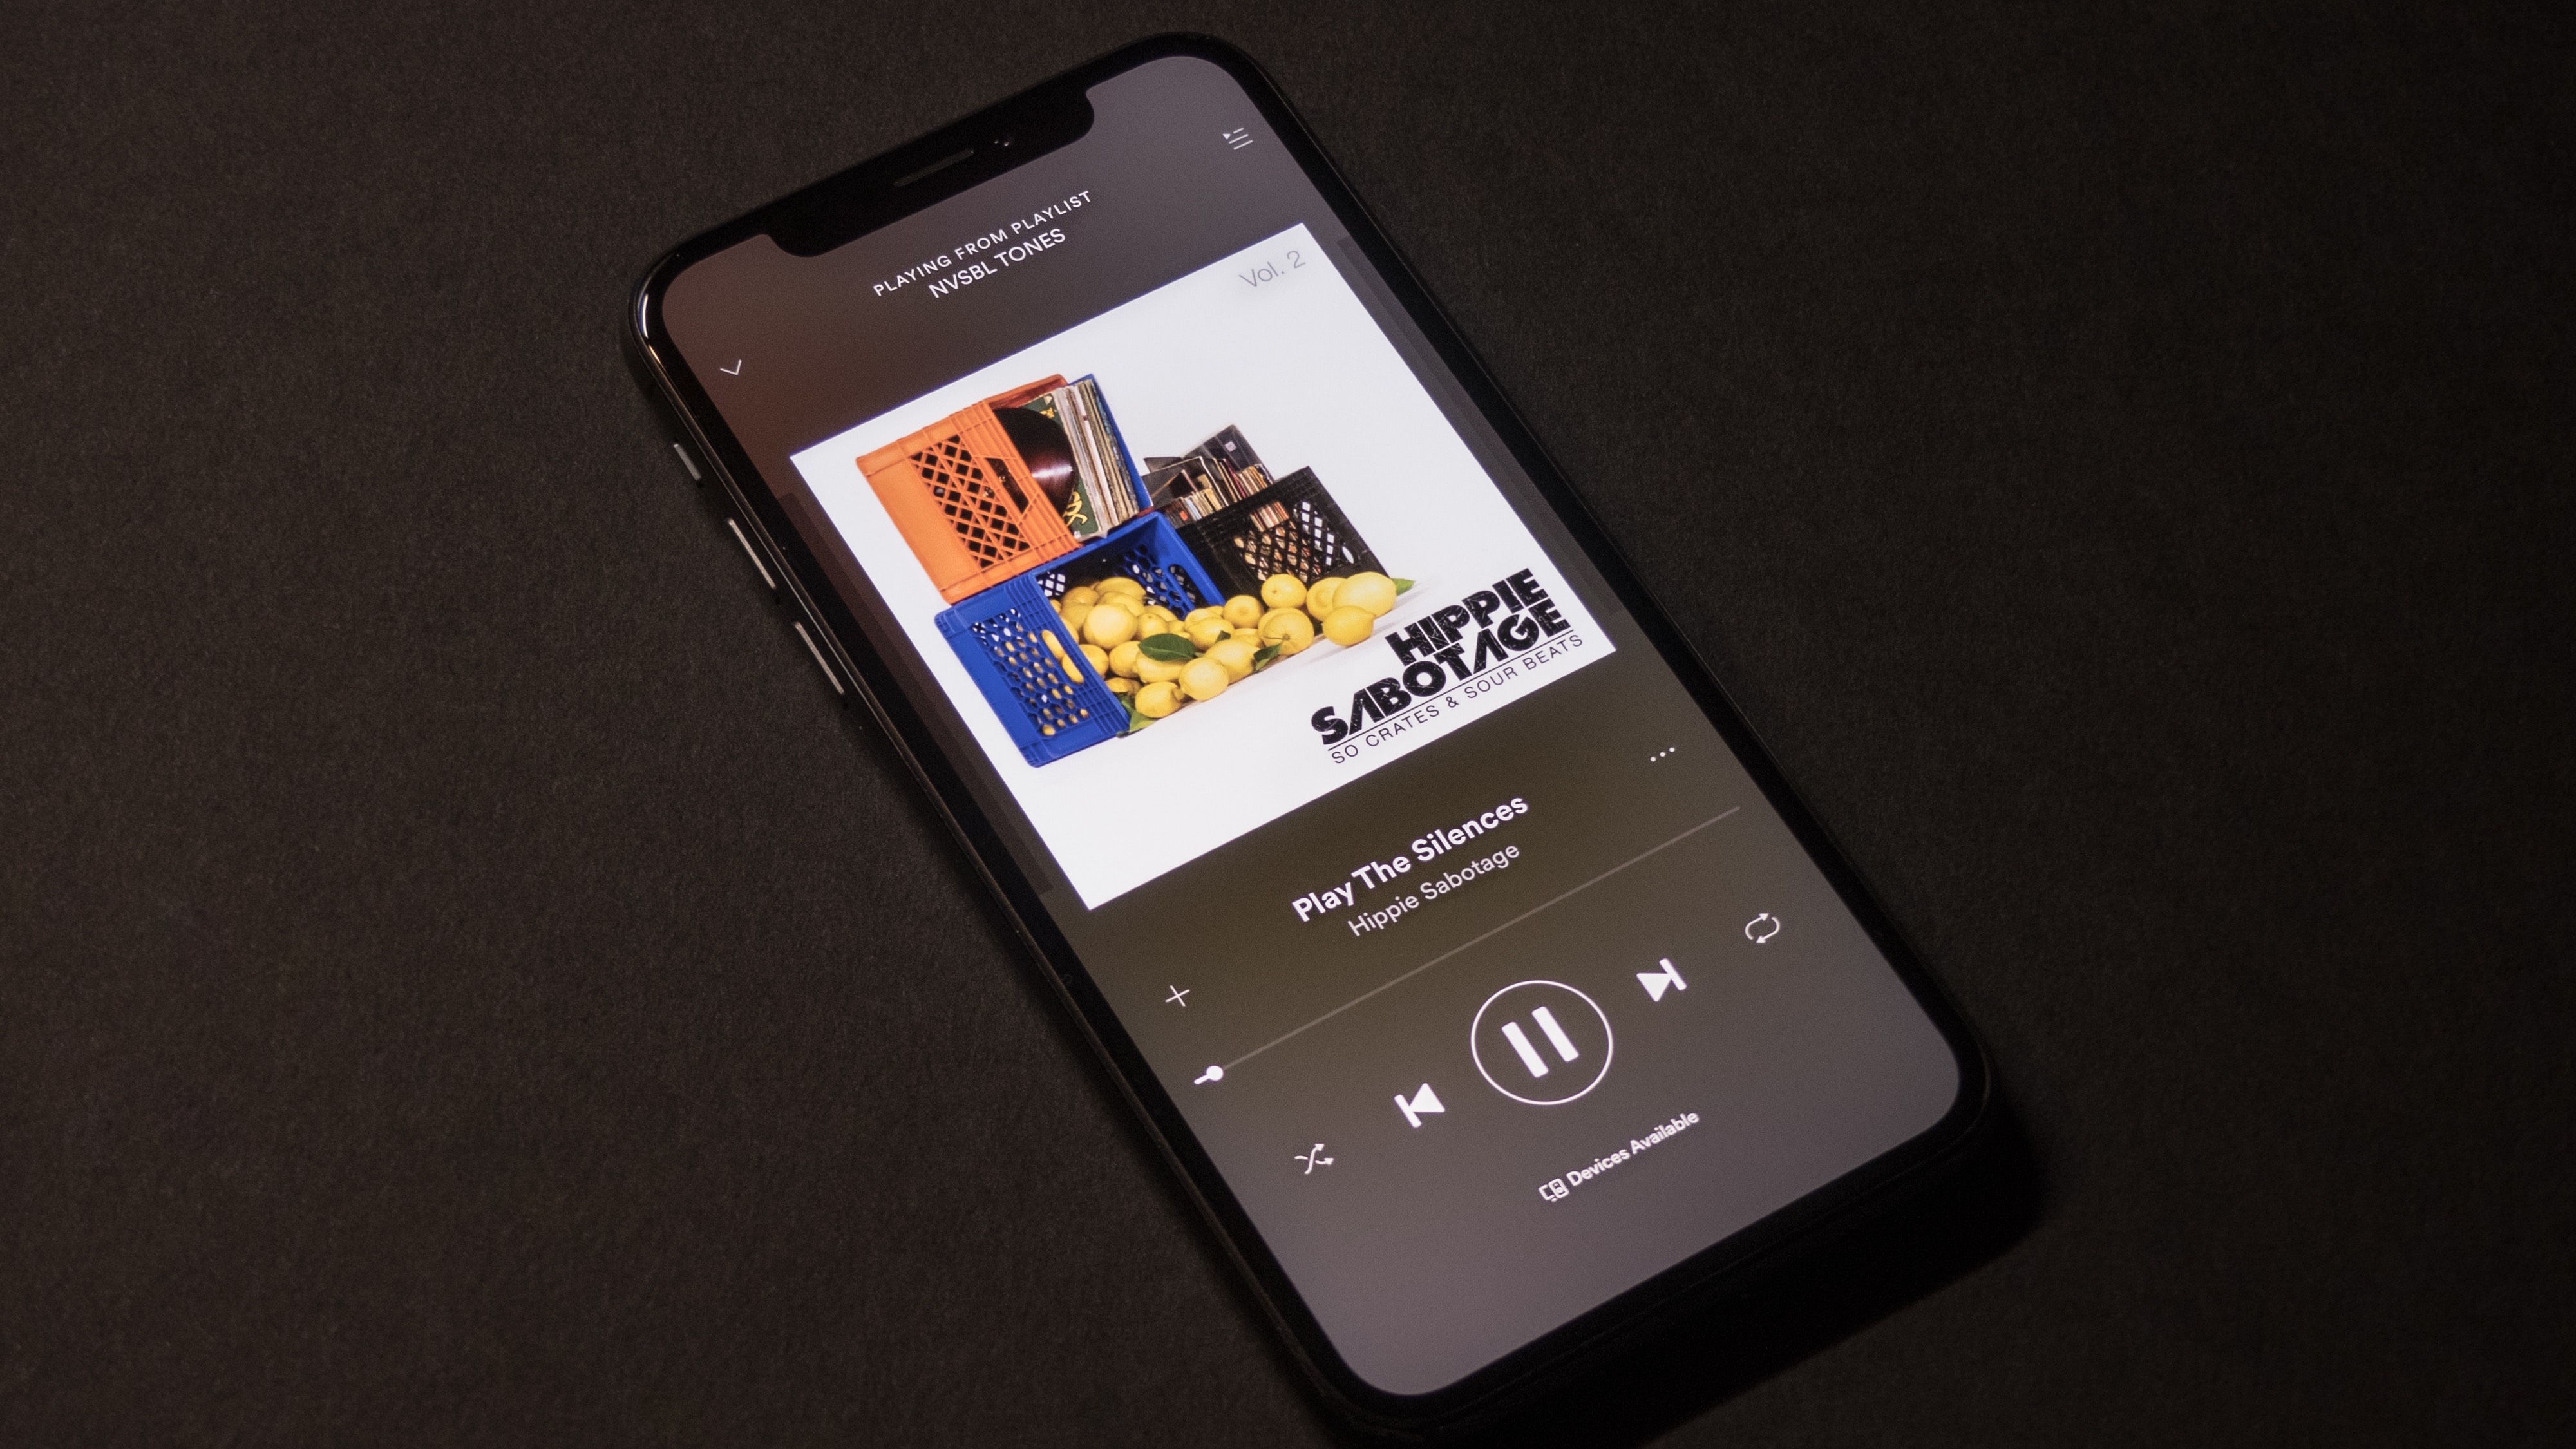 download the last version for ipod Spotify 1.2.14.1149